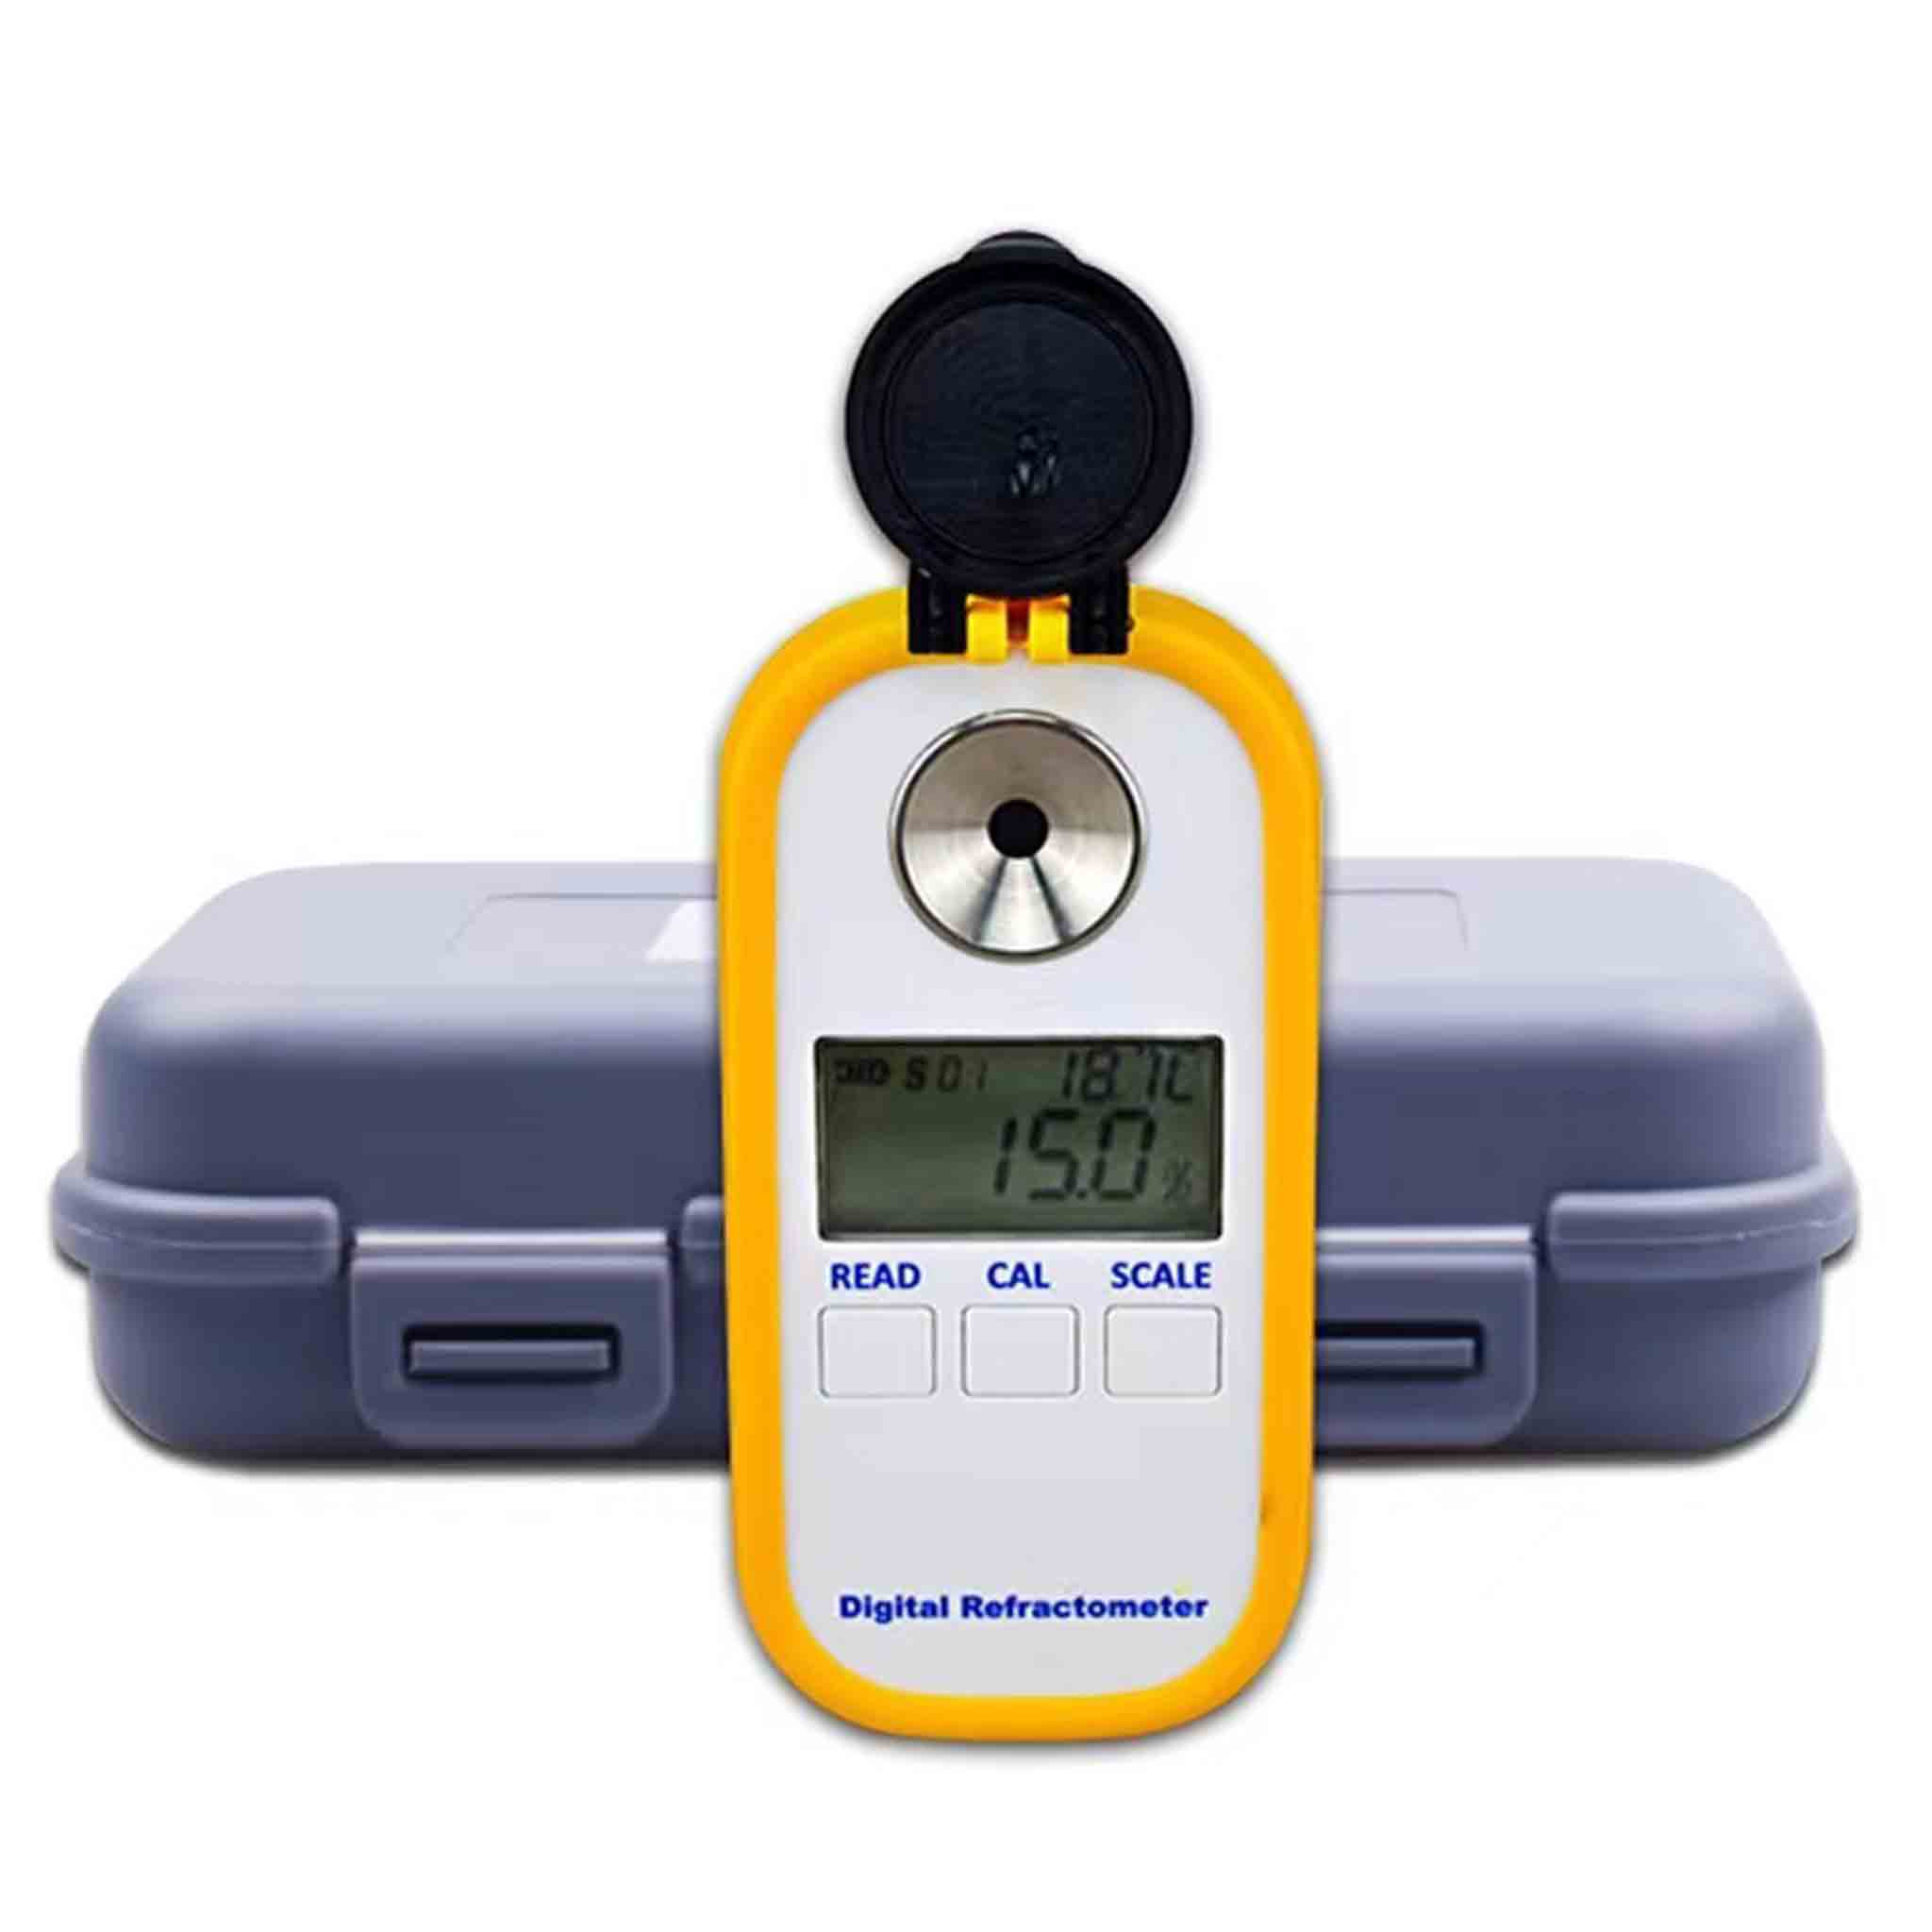 Digital Honey Refractometer for Measuring Water Content in Honey - Processing collection by Buzzbee Beekeeping Supplies